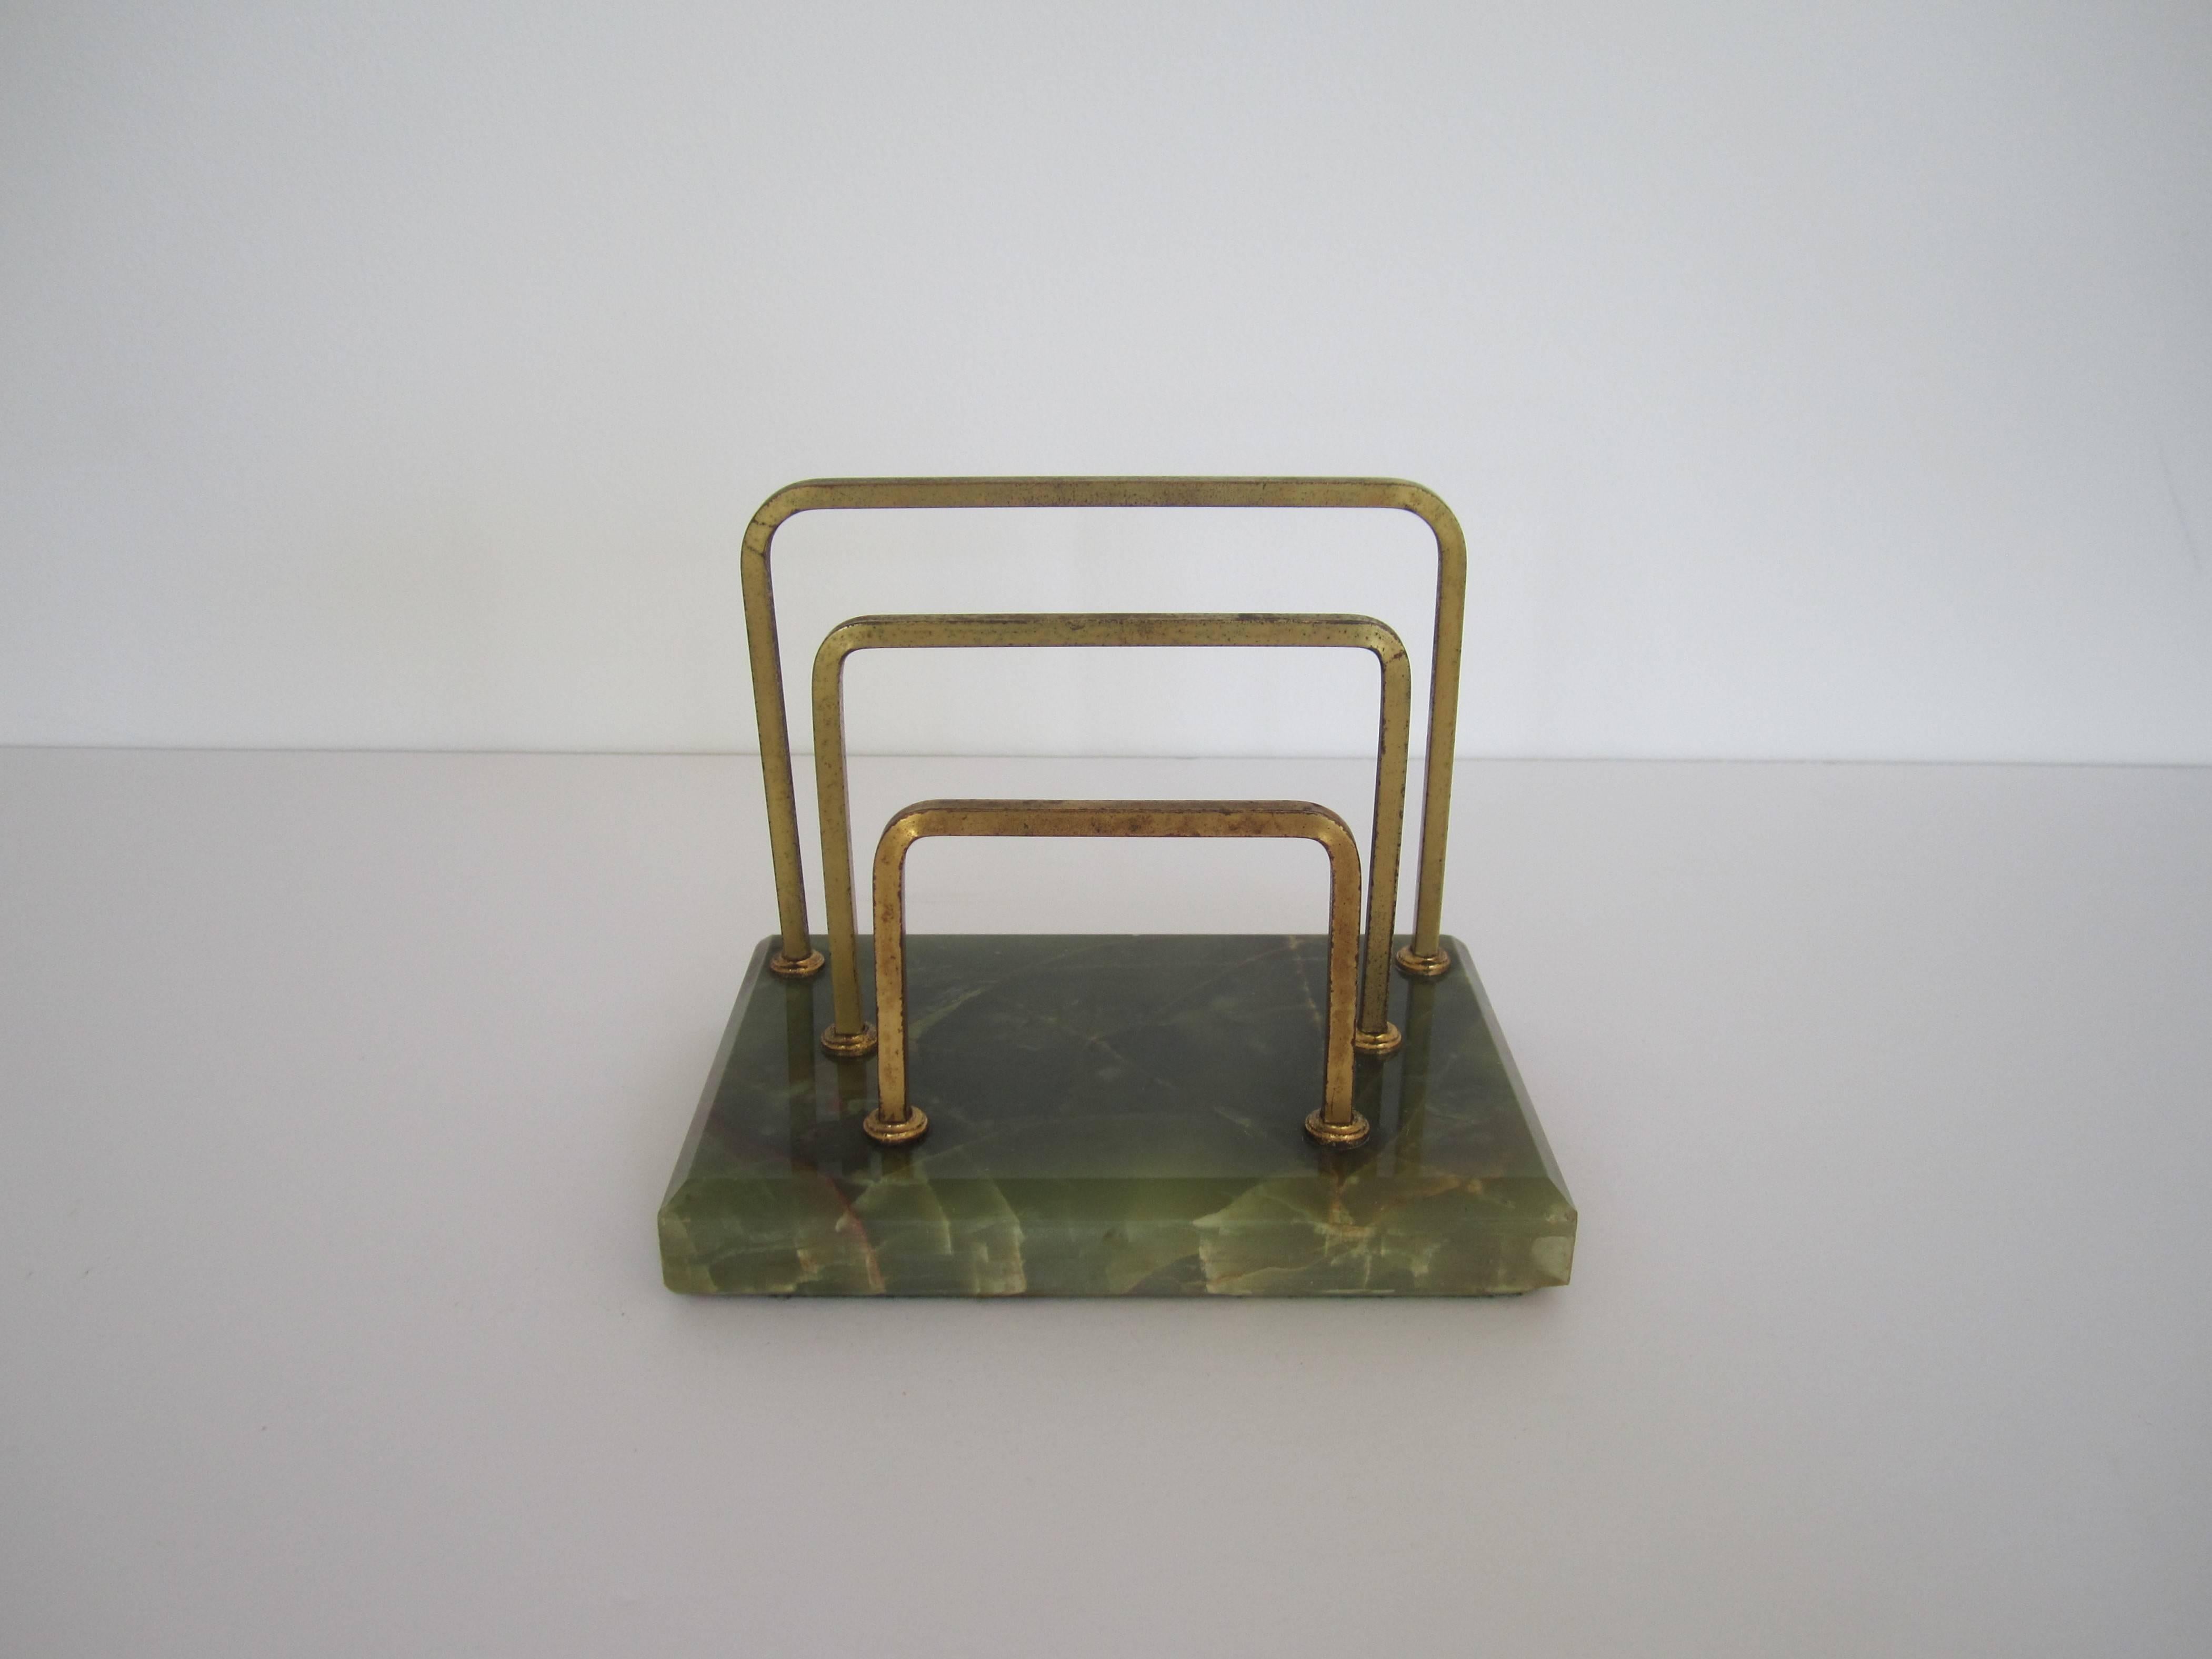 A substantial vintage brass and green onyx mail or letter desk organizer. Onyx base is 1